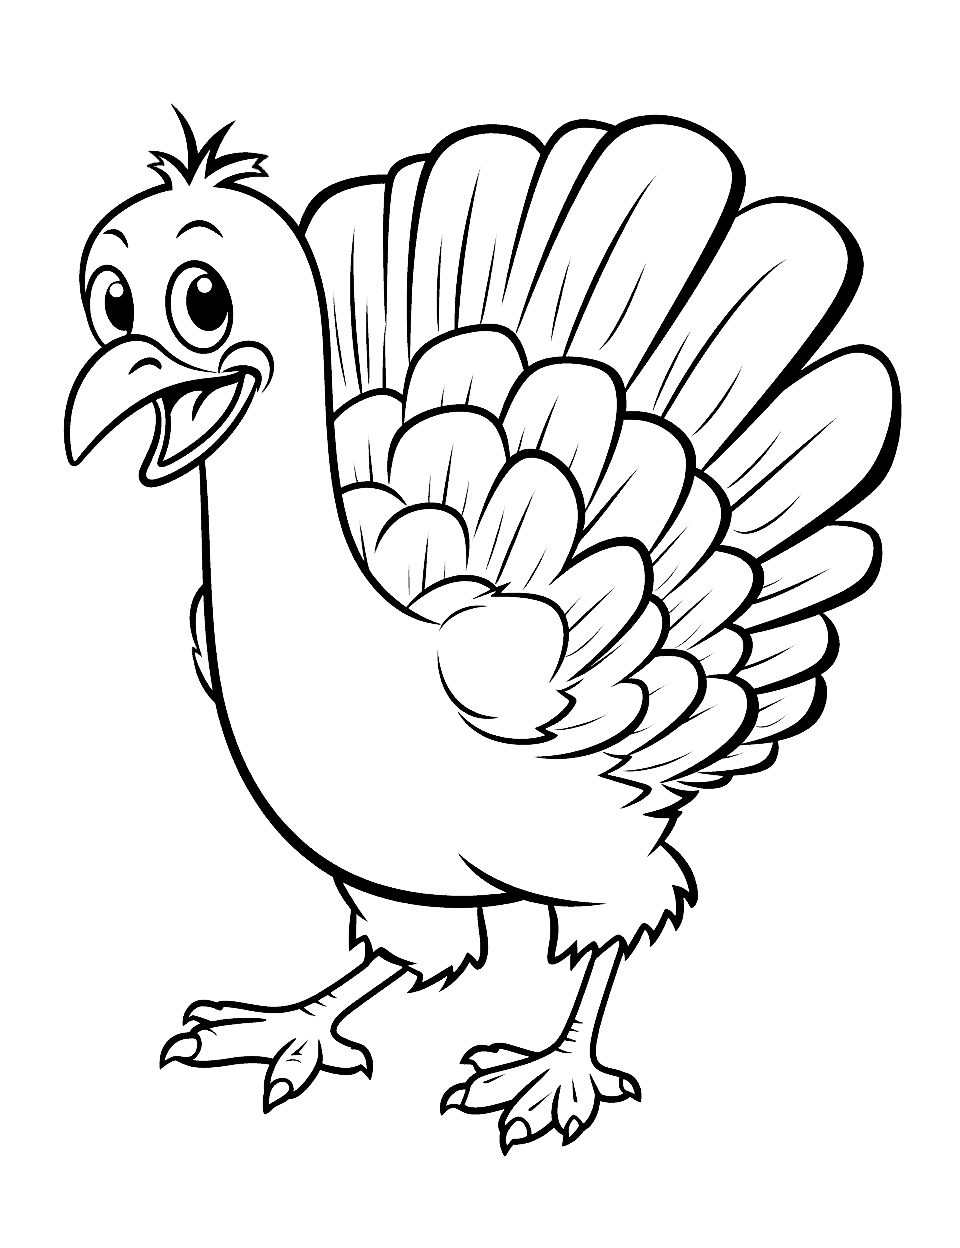 Clipart Turkey in Action Coloring Page - A simple, cartoon-style clipart image of a turkey running or flying.